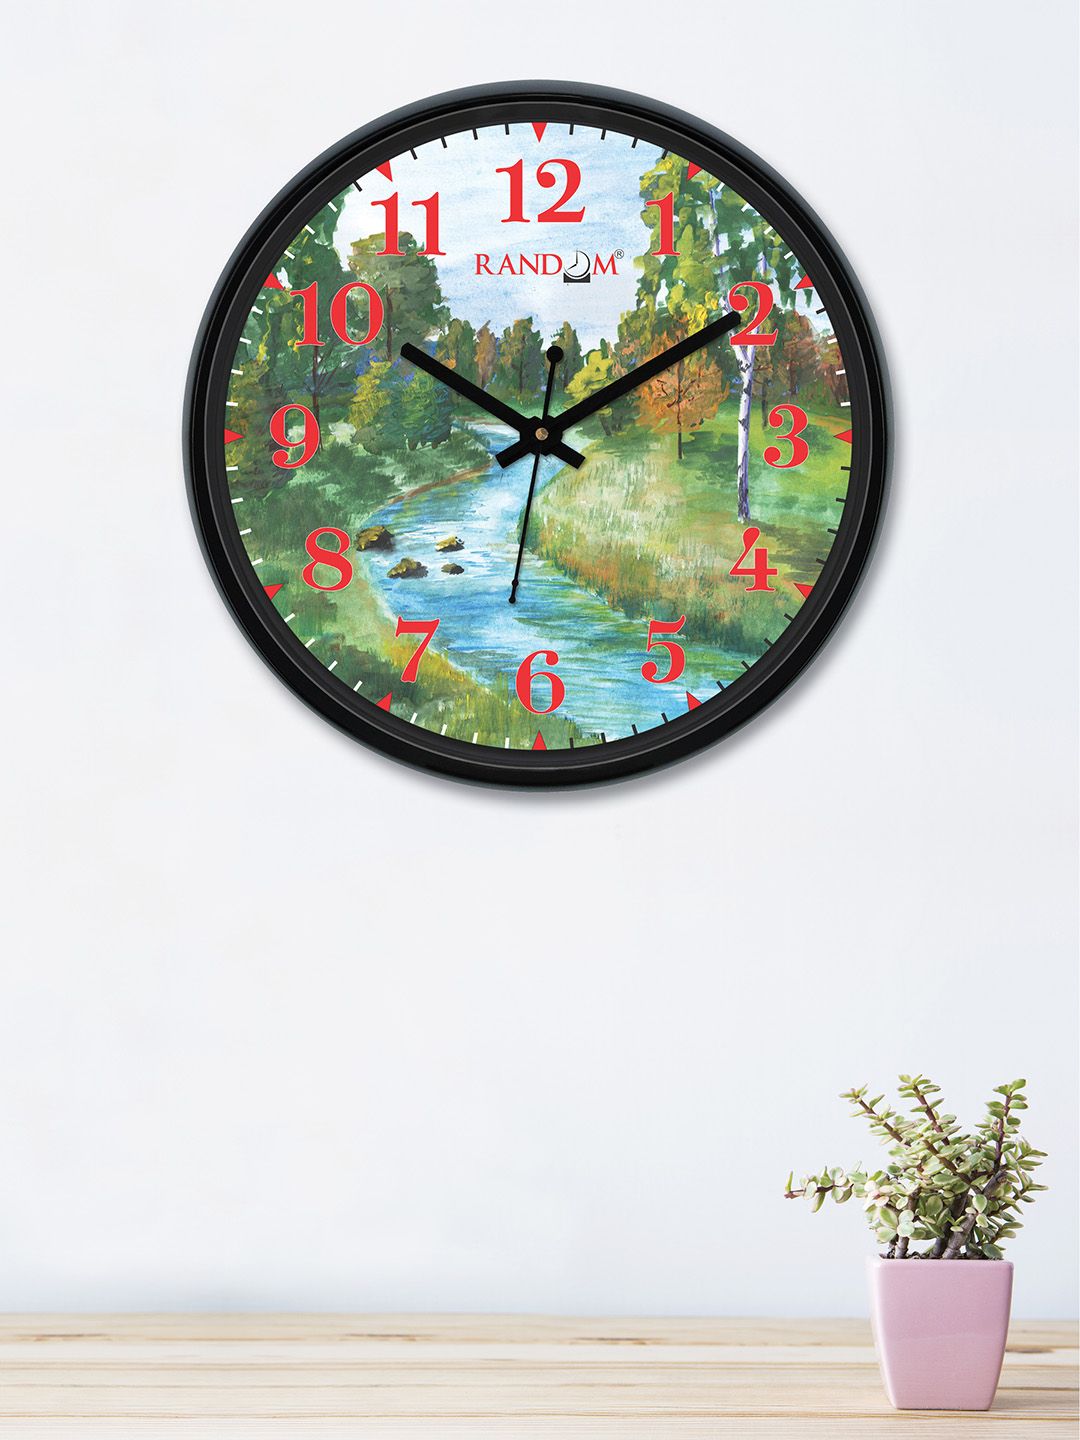 RANDOM Sea Green & Blue Round Printed 30 cm Analogue Wall Clock Price in India